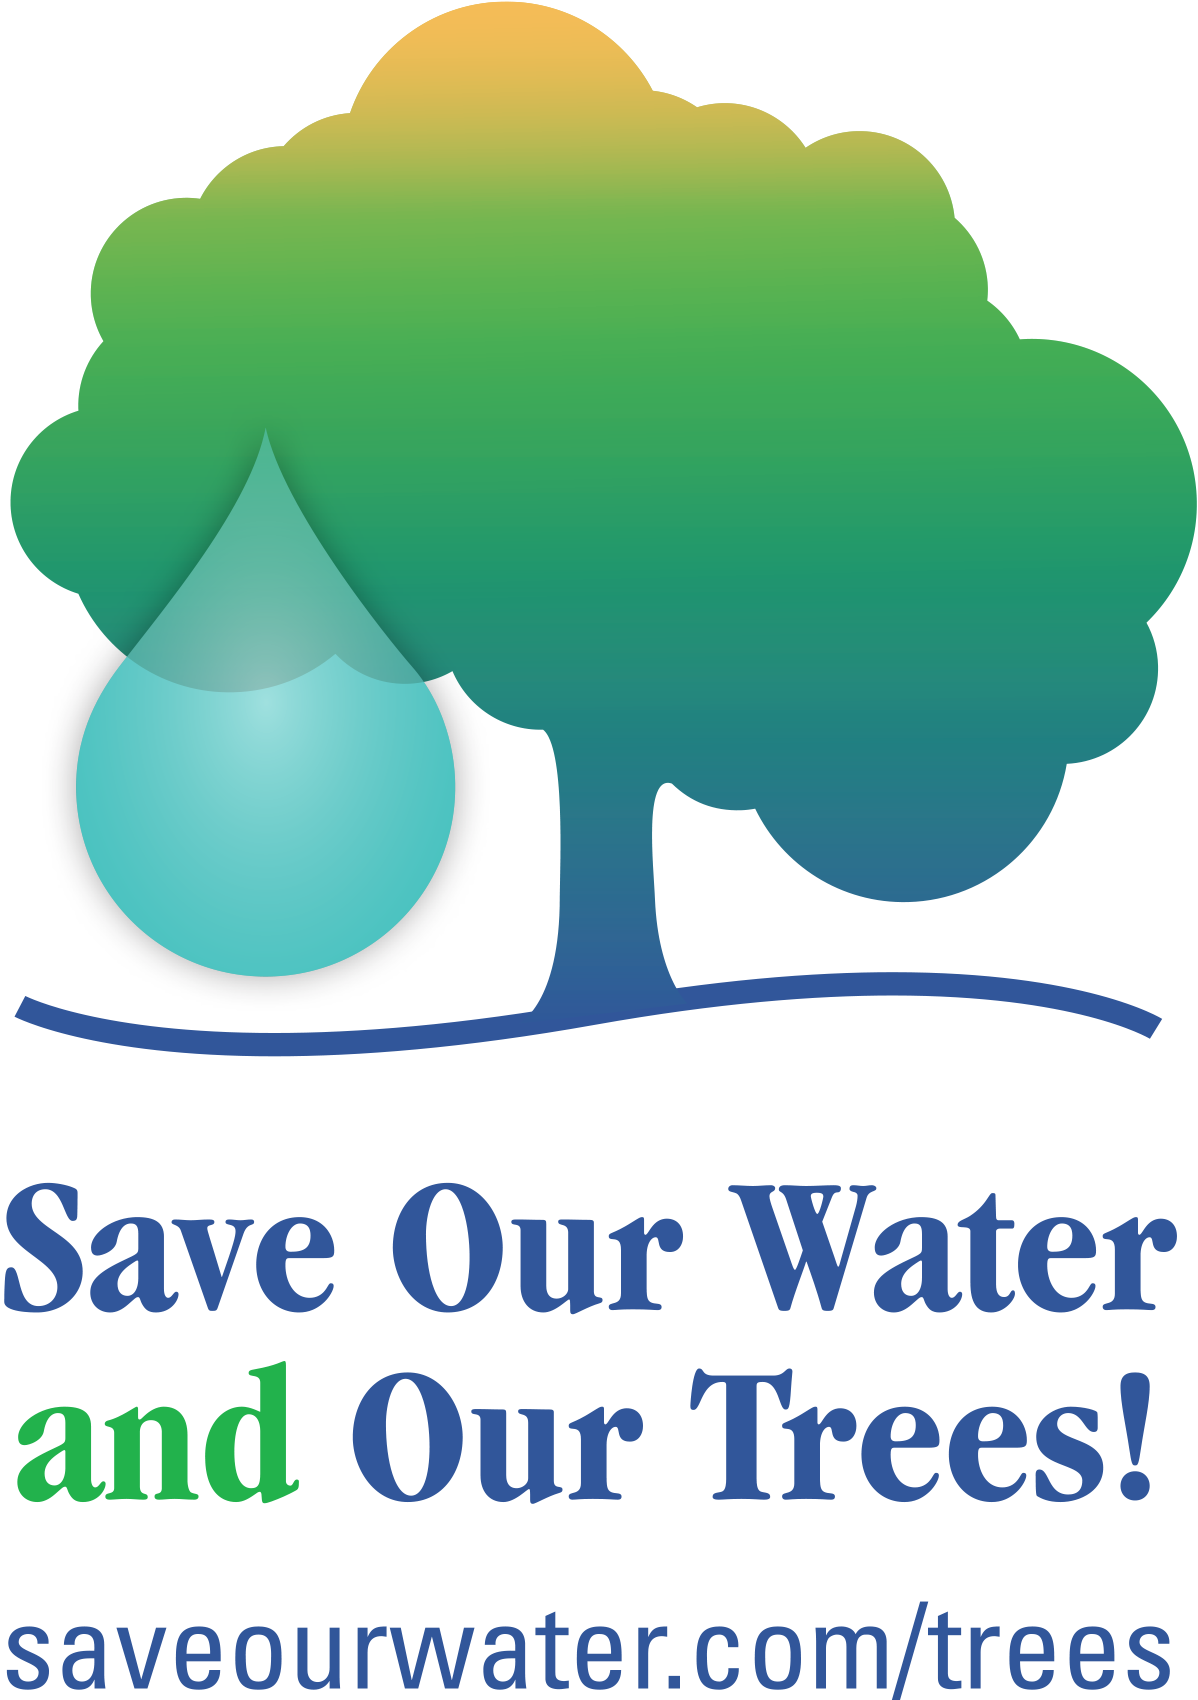 Official Press Release: Save Our Water And Our Trees!